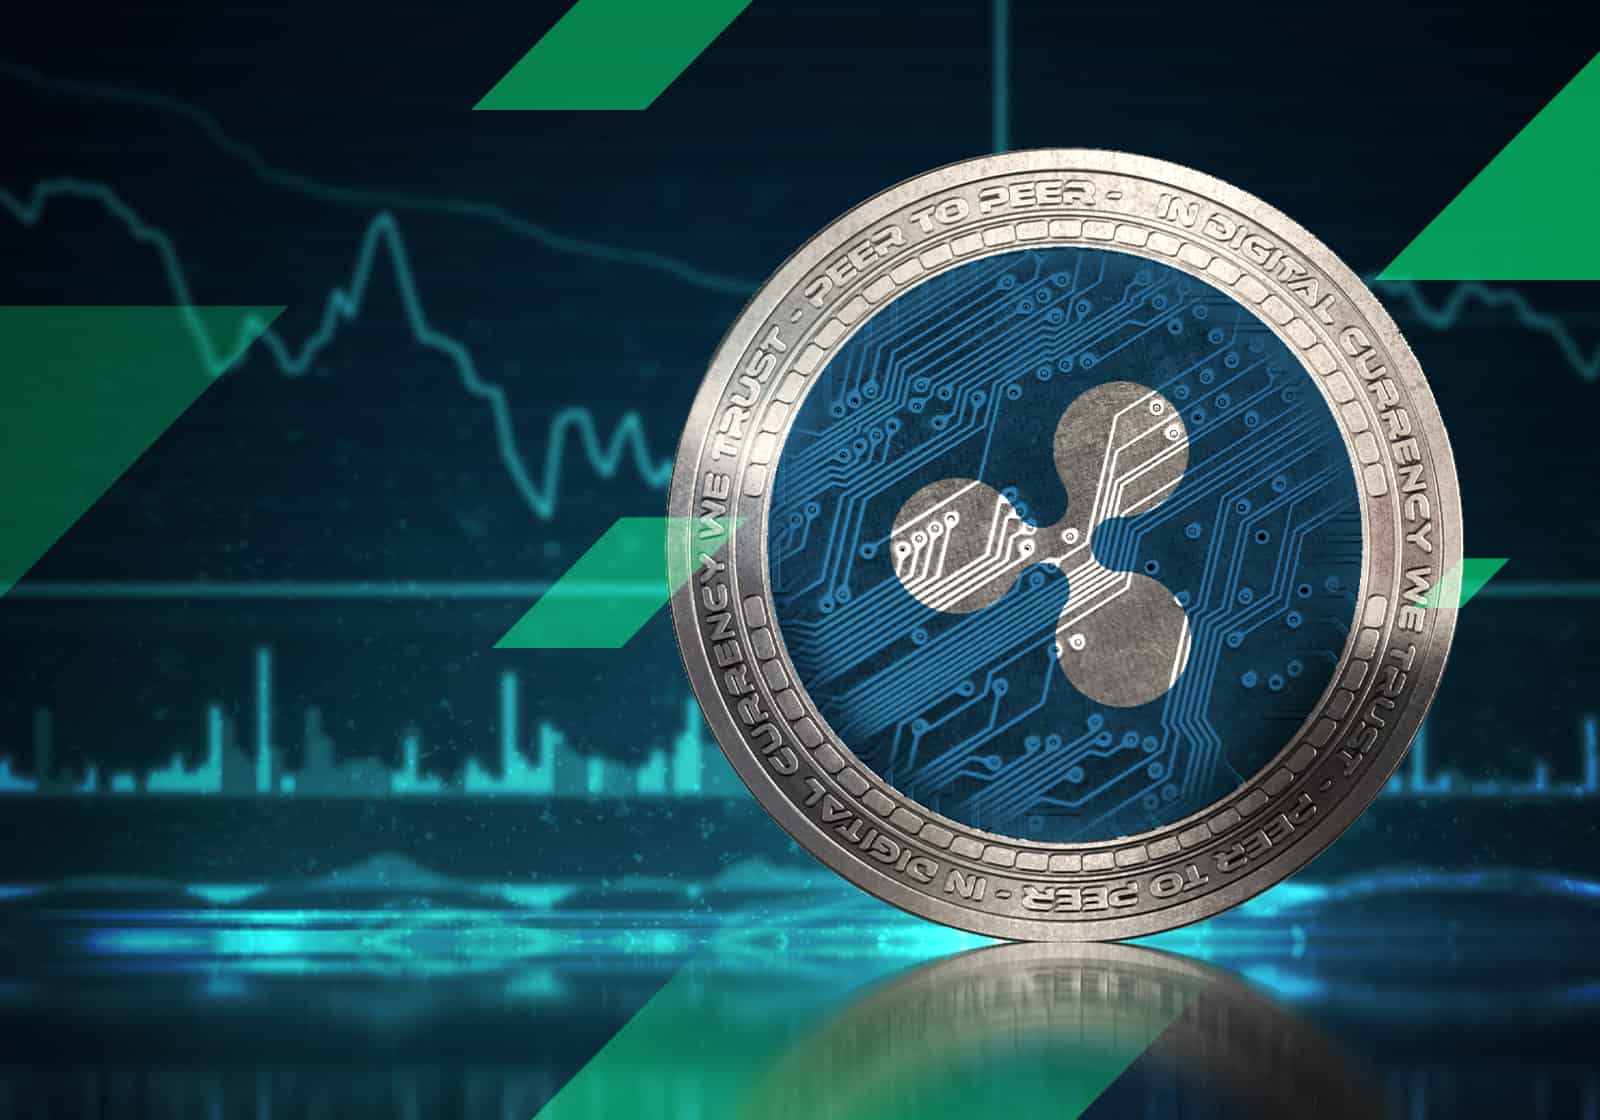 What is ripple?